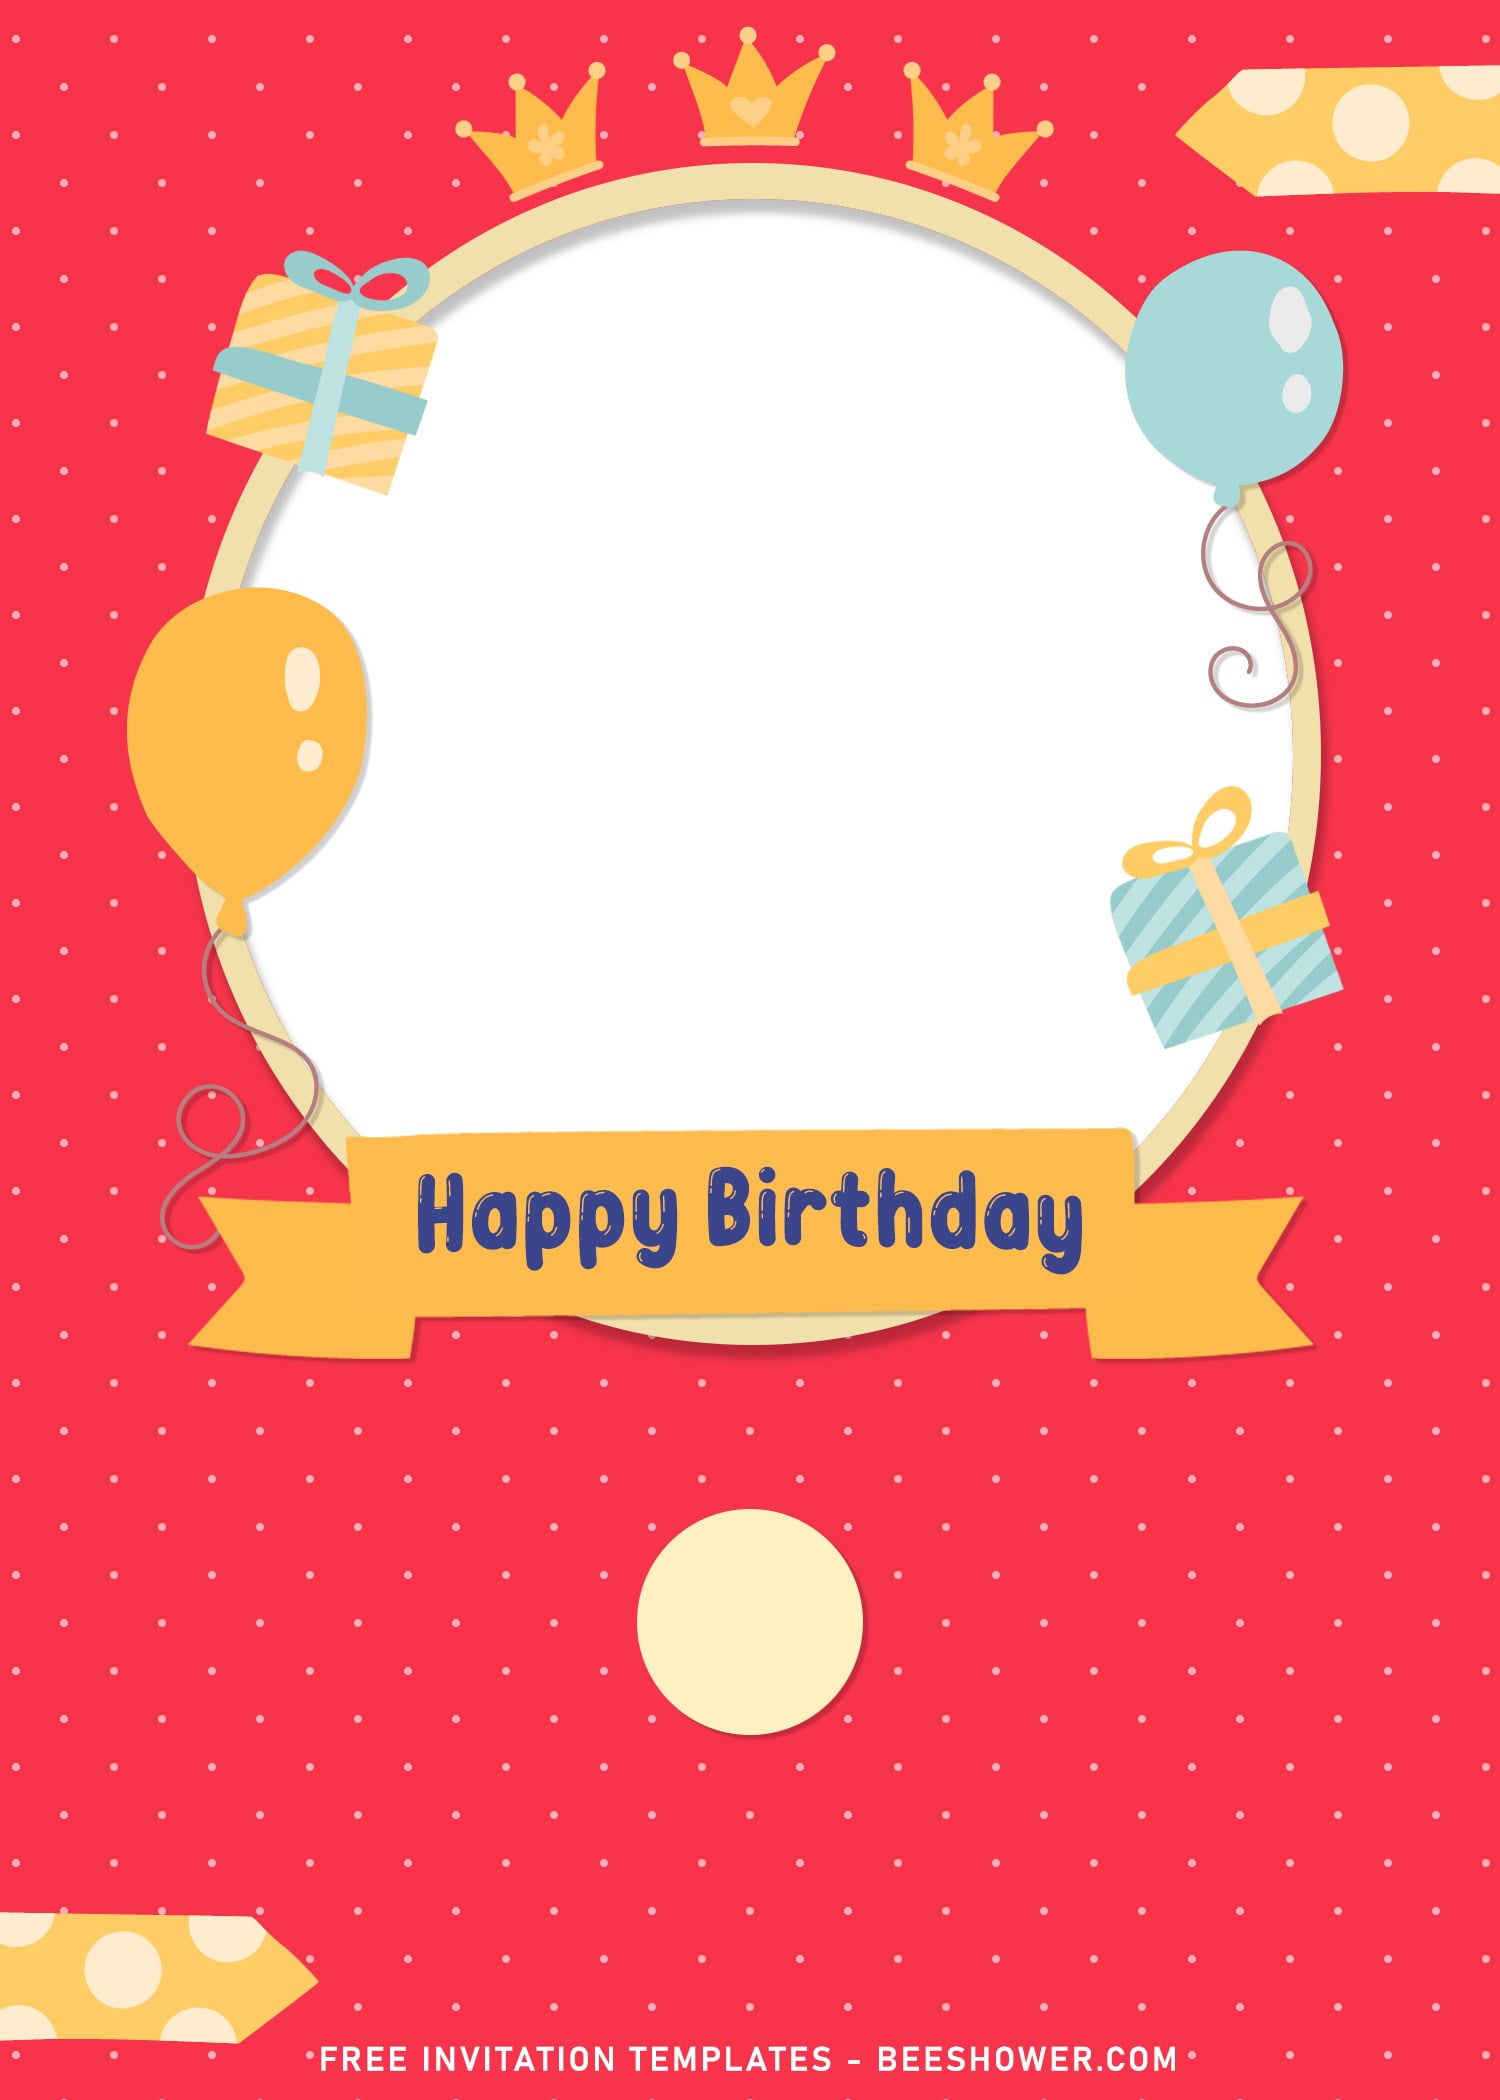 8+ Cute Birthday Invitation Templates For Your Kid's Birthday Party ...